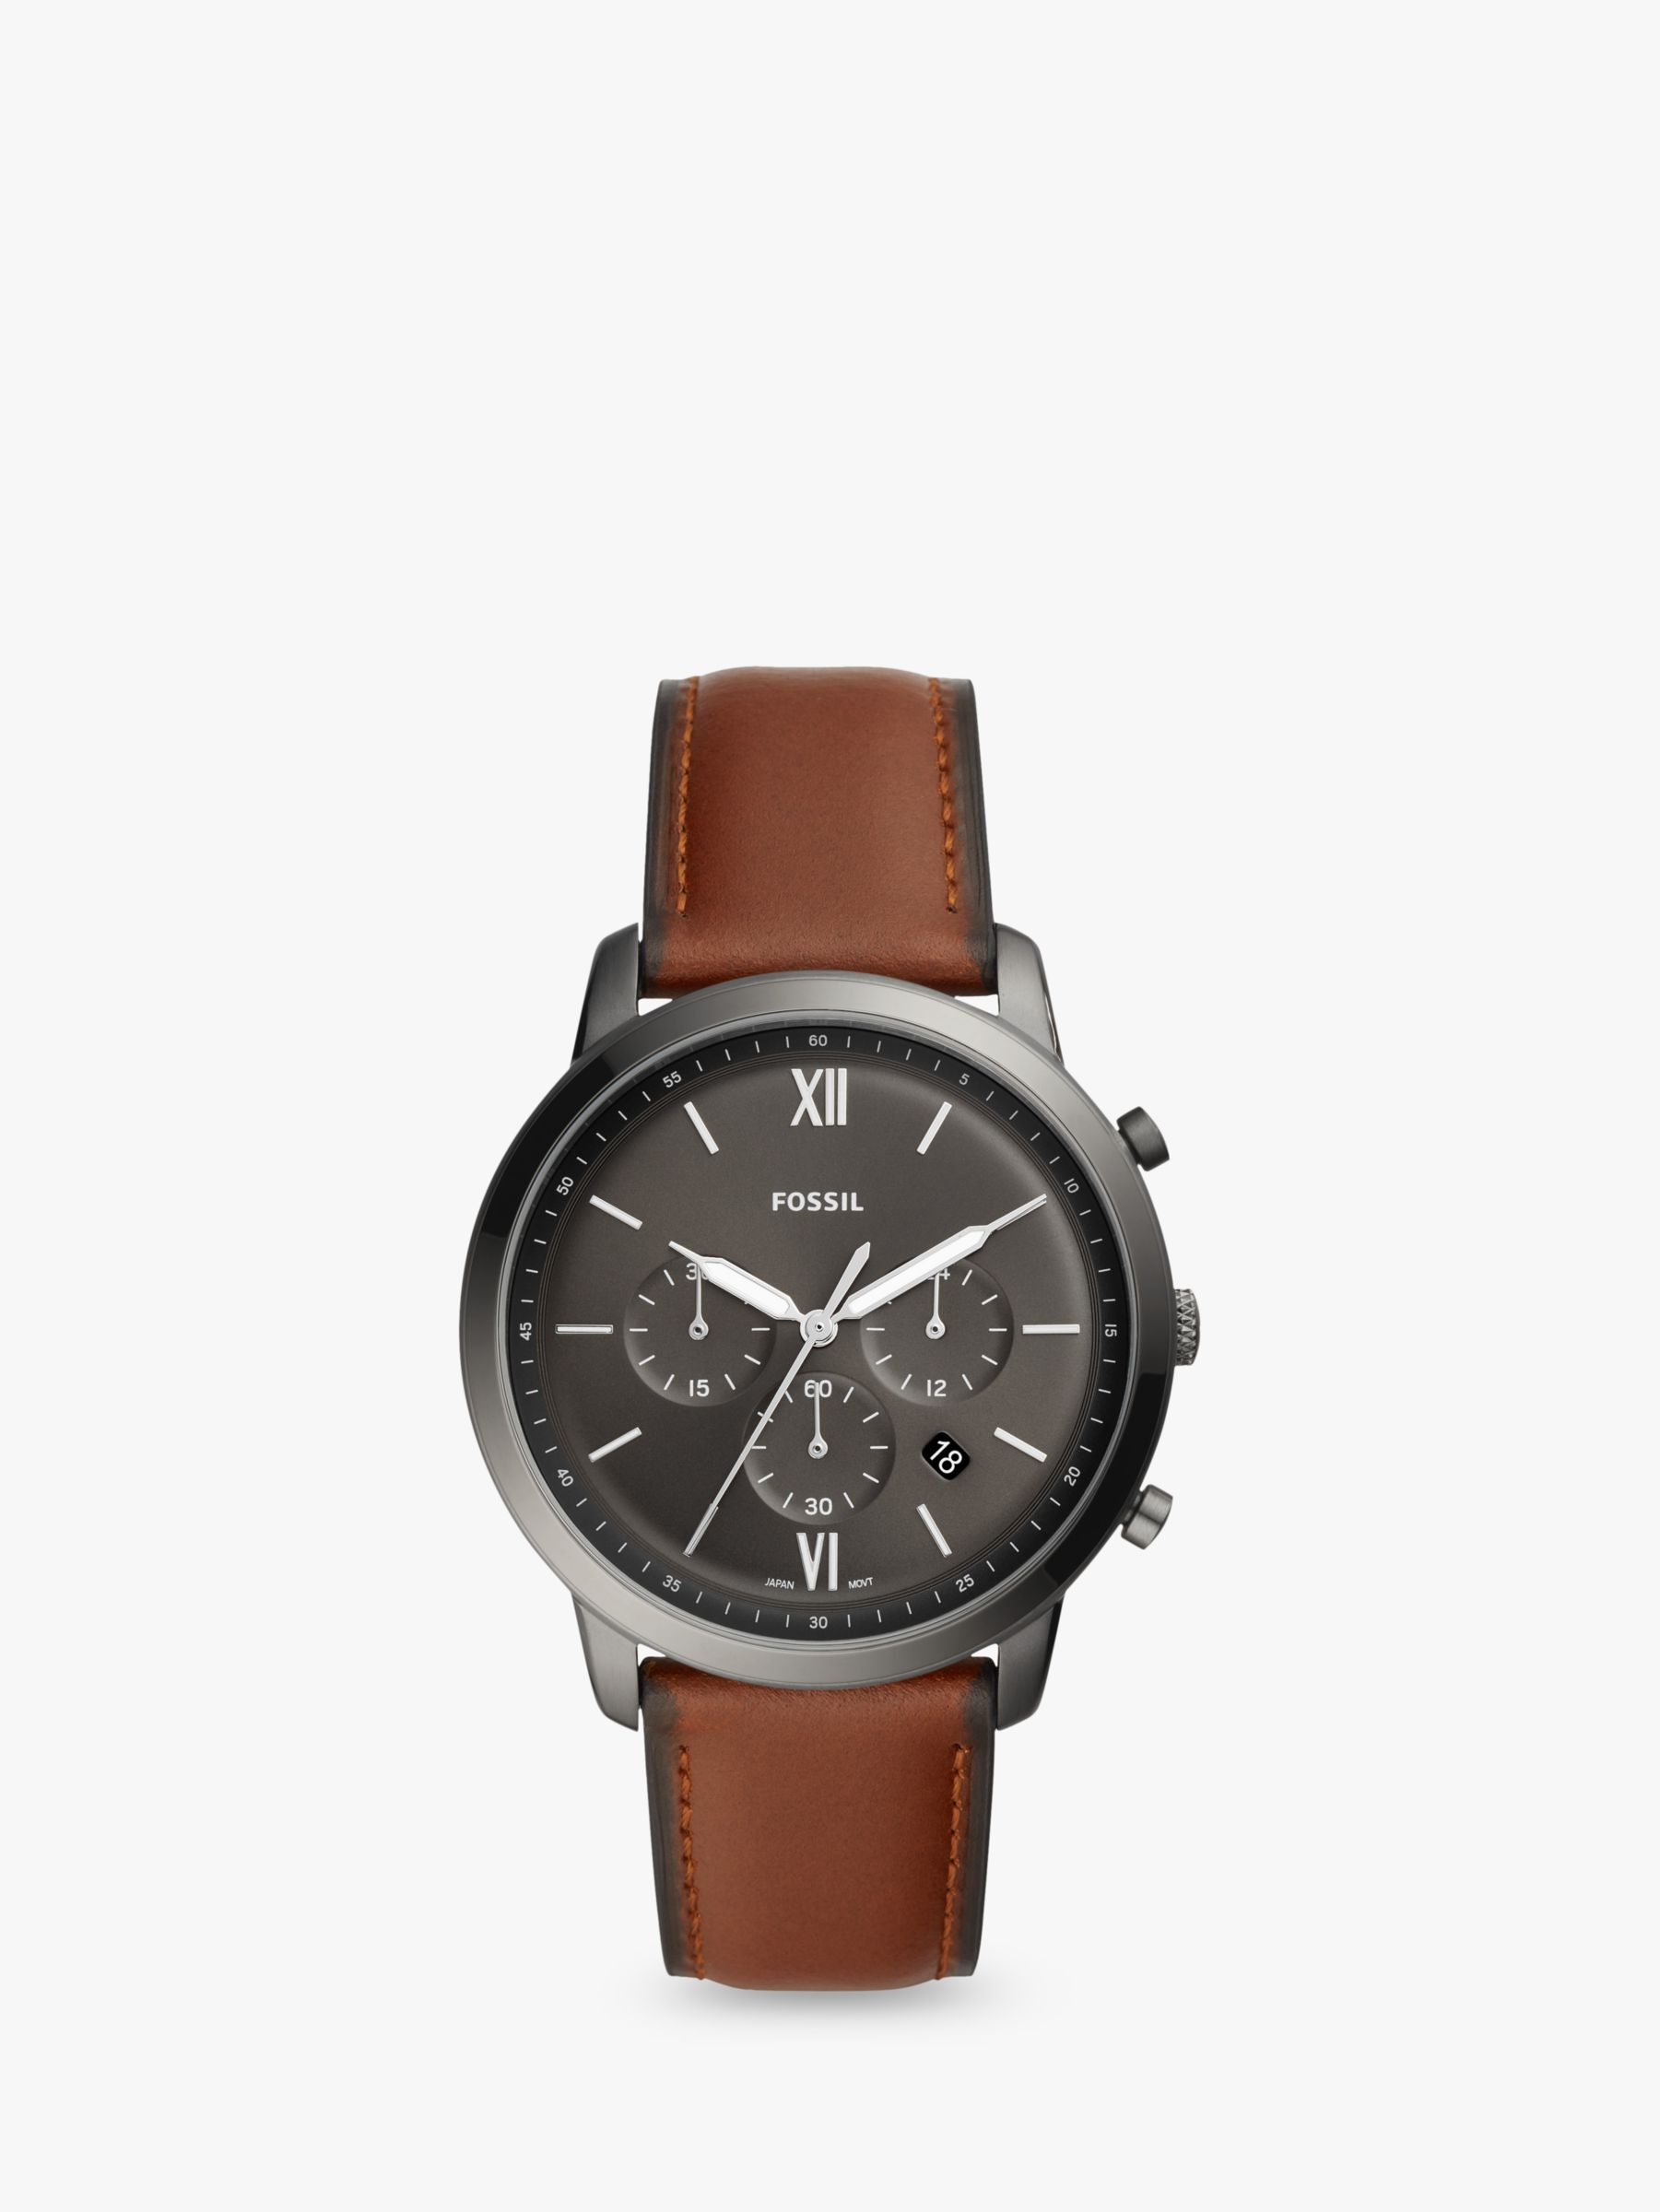 Fossil Men's Neutra Chronograph Date Leather Strap Watch, Brown/Grey ...